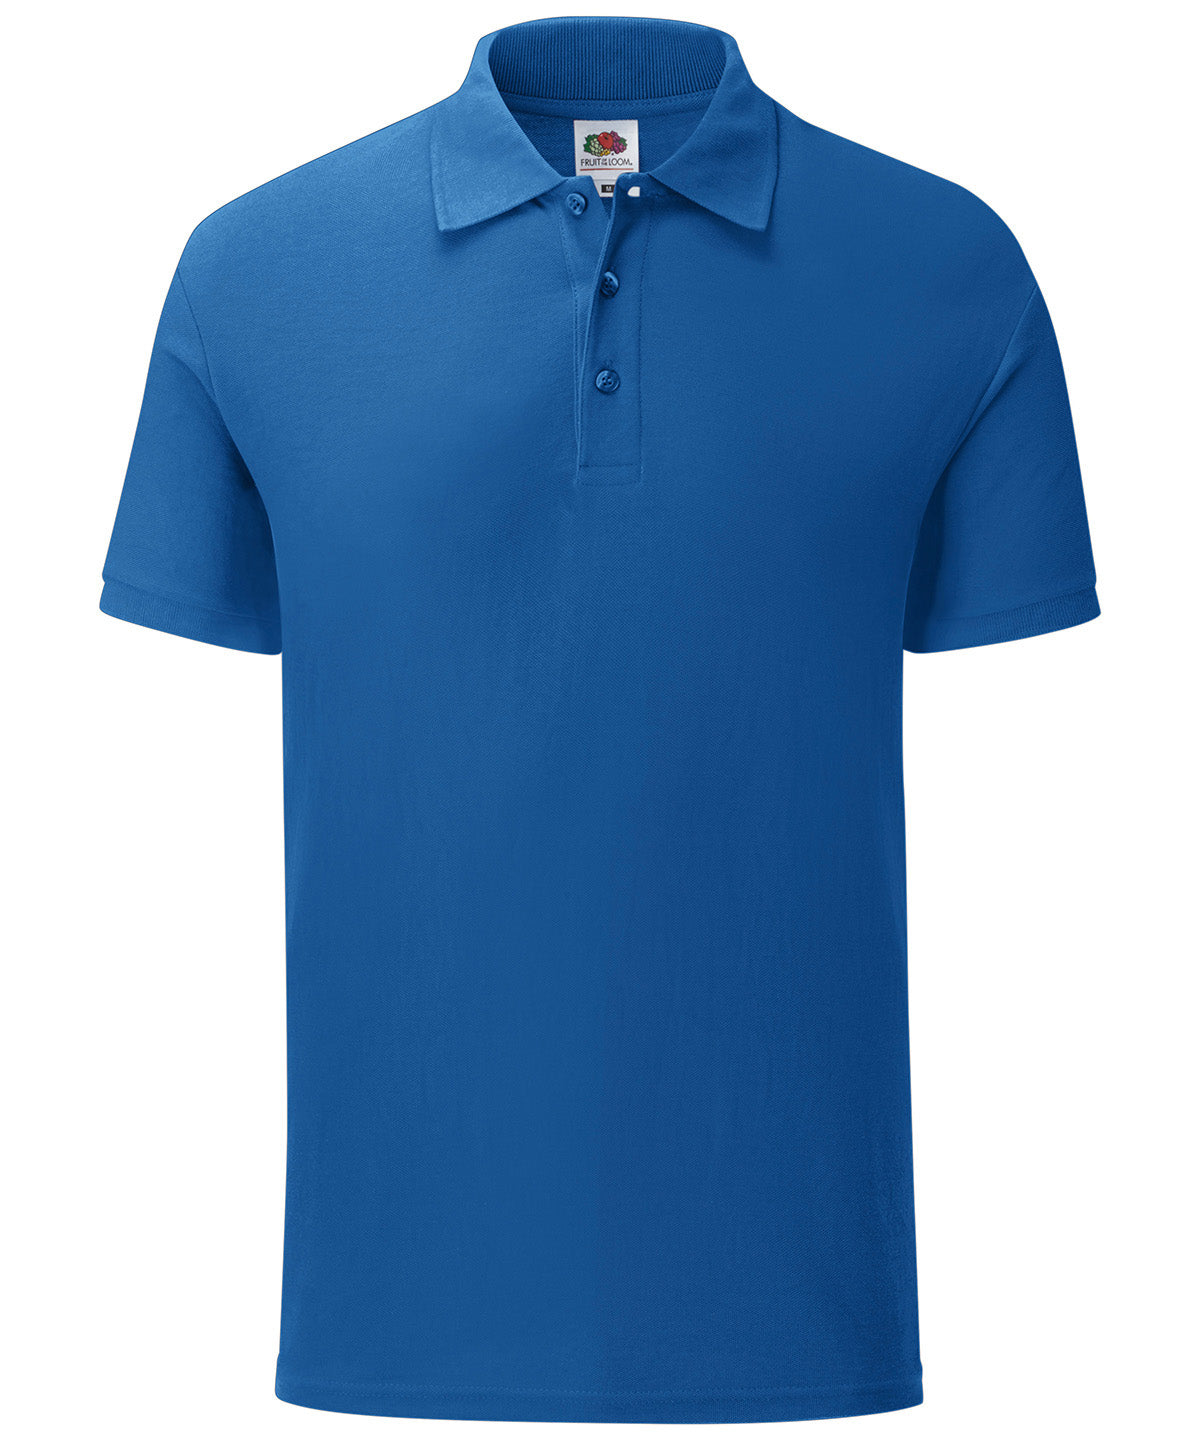 Personalised Polo Shirts - Navy Fruit of the Loom Iconic polo